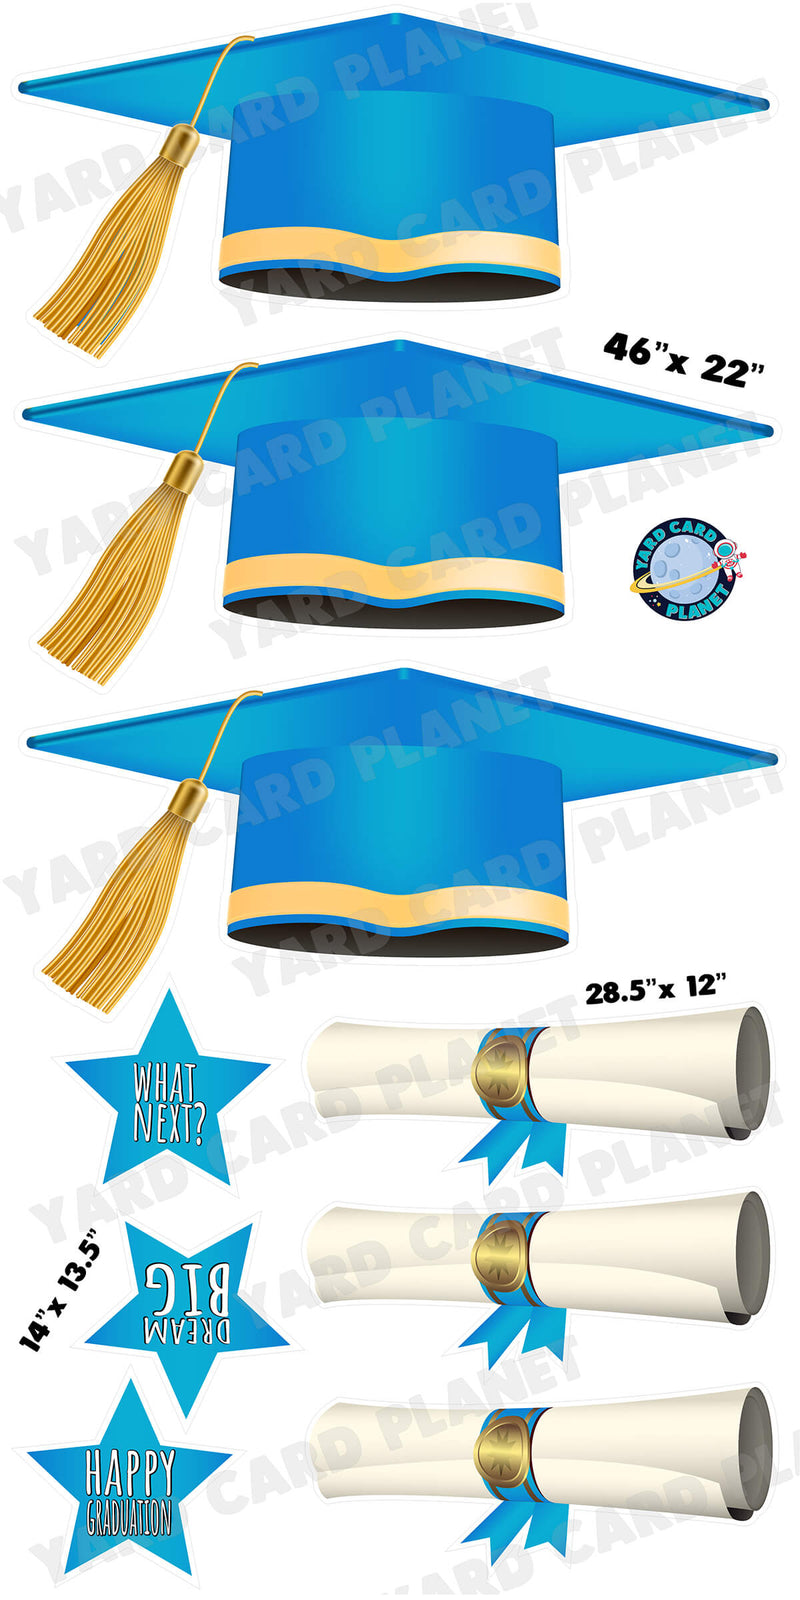 Extra Large Light Blue Graduation Caps, Diplomas and Signs Yard Card Flair Set with measurements